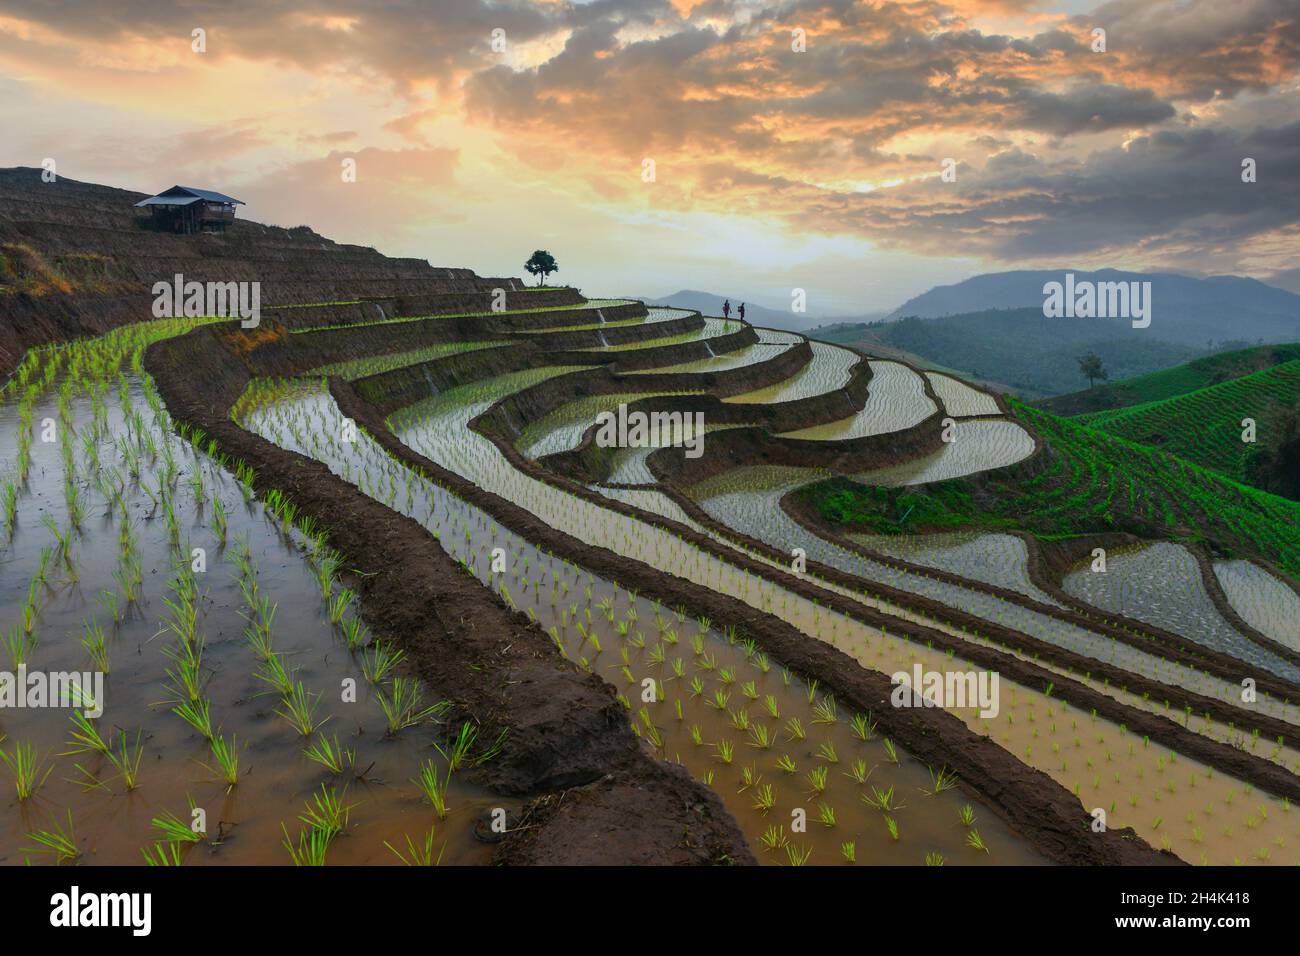 Two farmers working in flooded terraced rice fields at sunset, Ban Papongpieng , Chiang Mai, Thailand Stock Photo